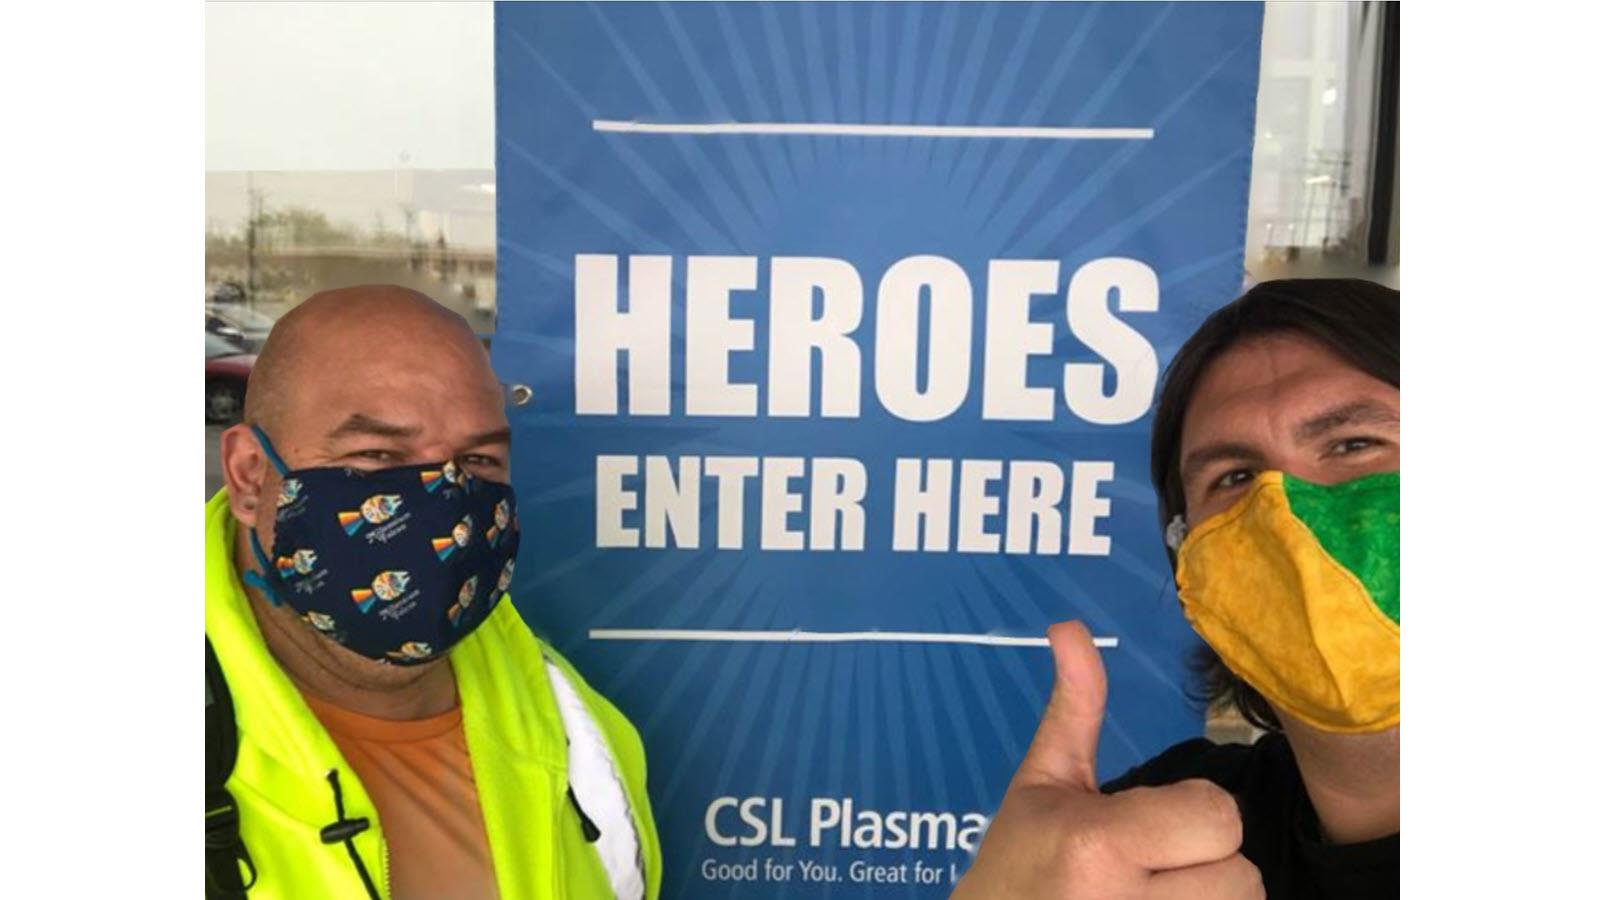 Two CSL Behring employees - Jason Tanner and Guy Redman - outside a CSL Plasma Center showing thumbs up